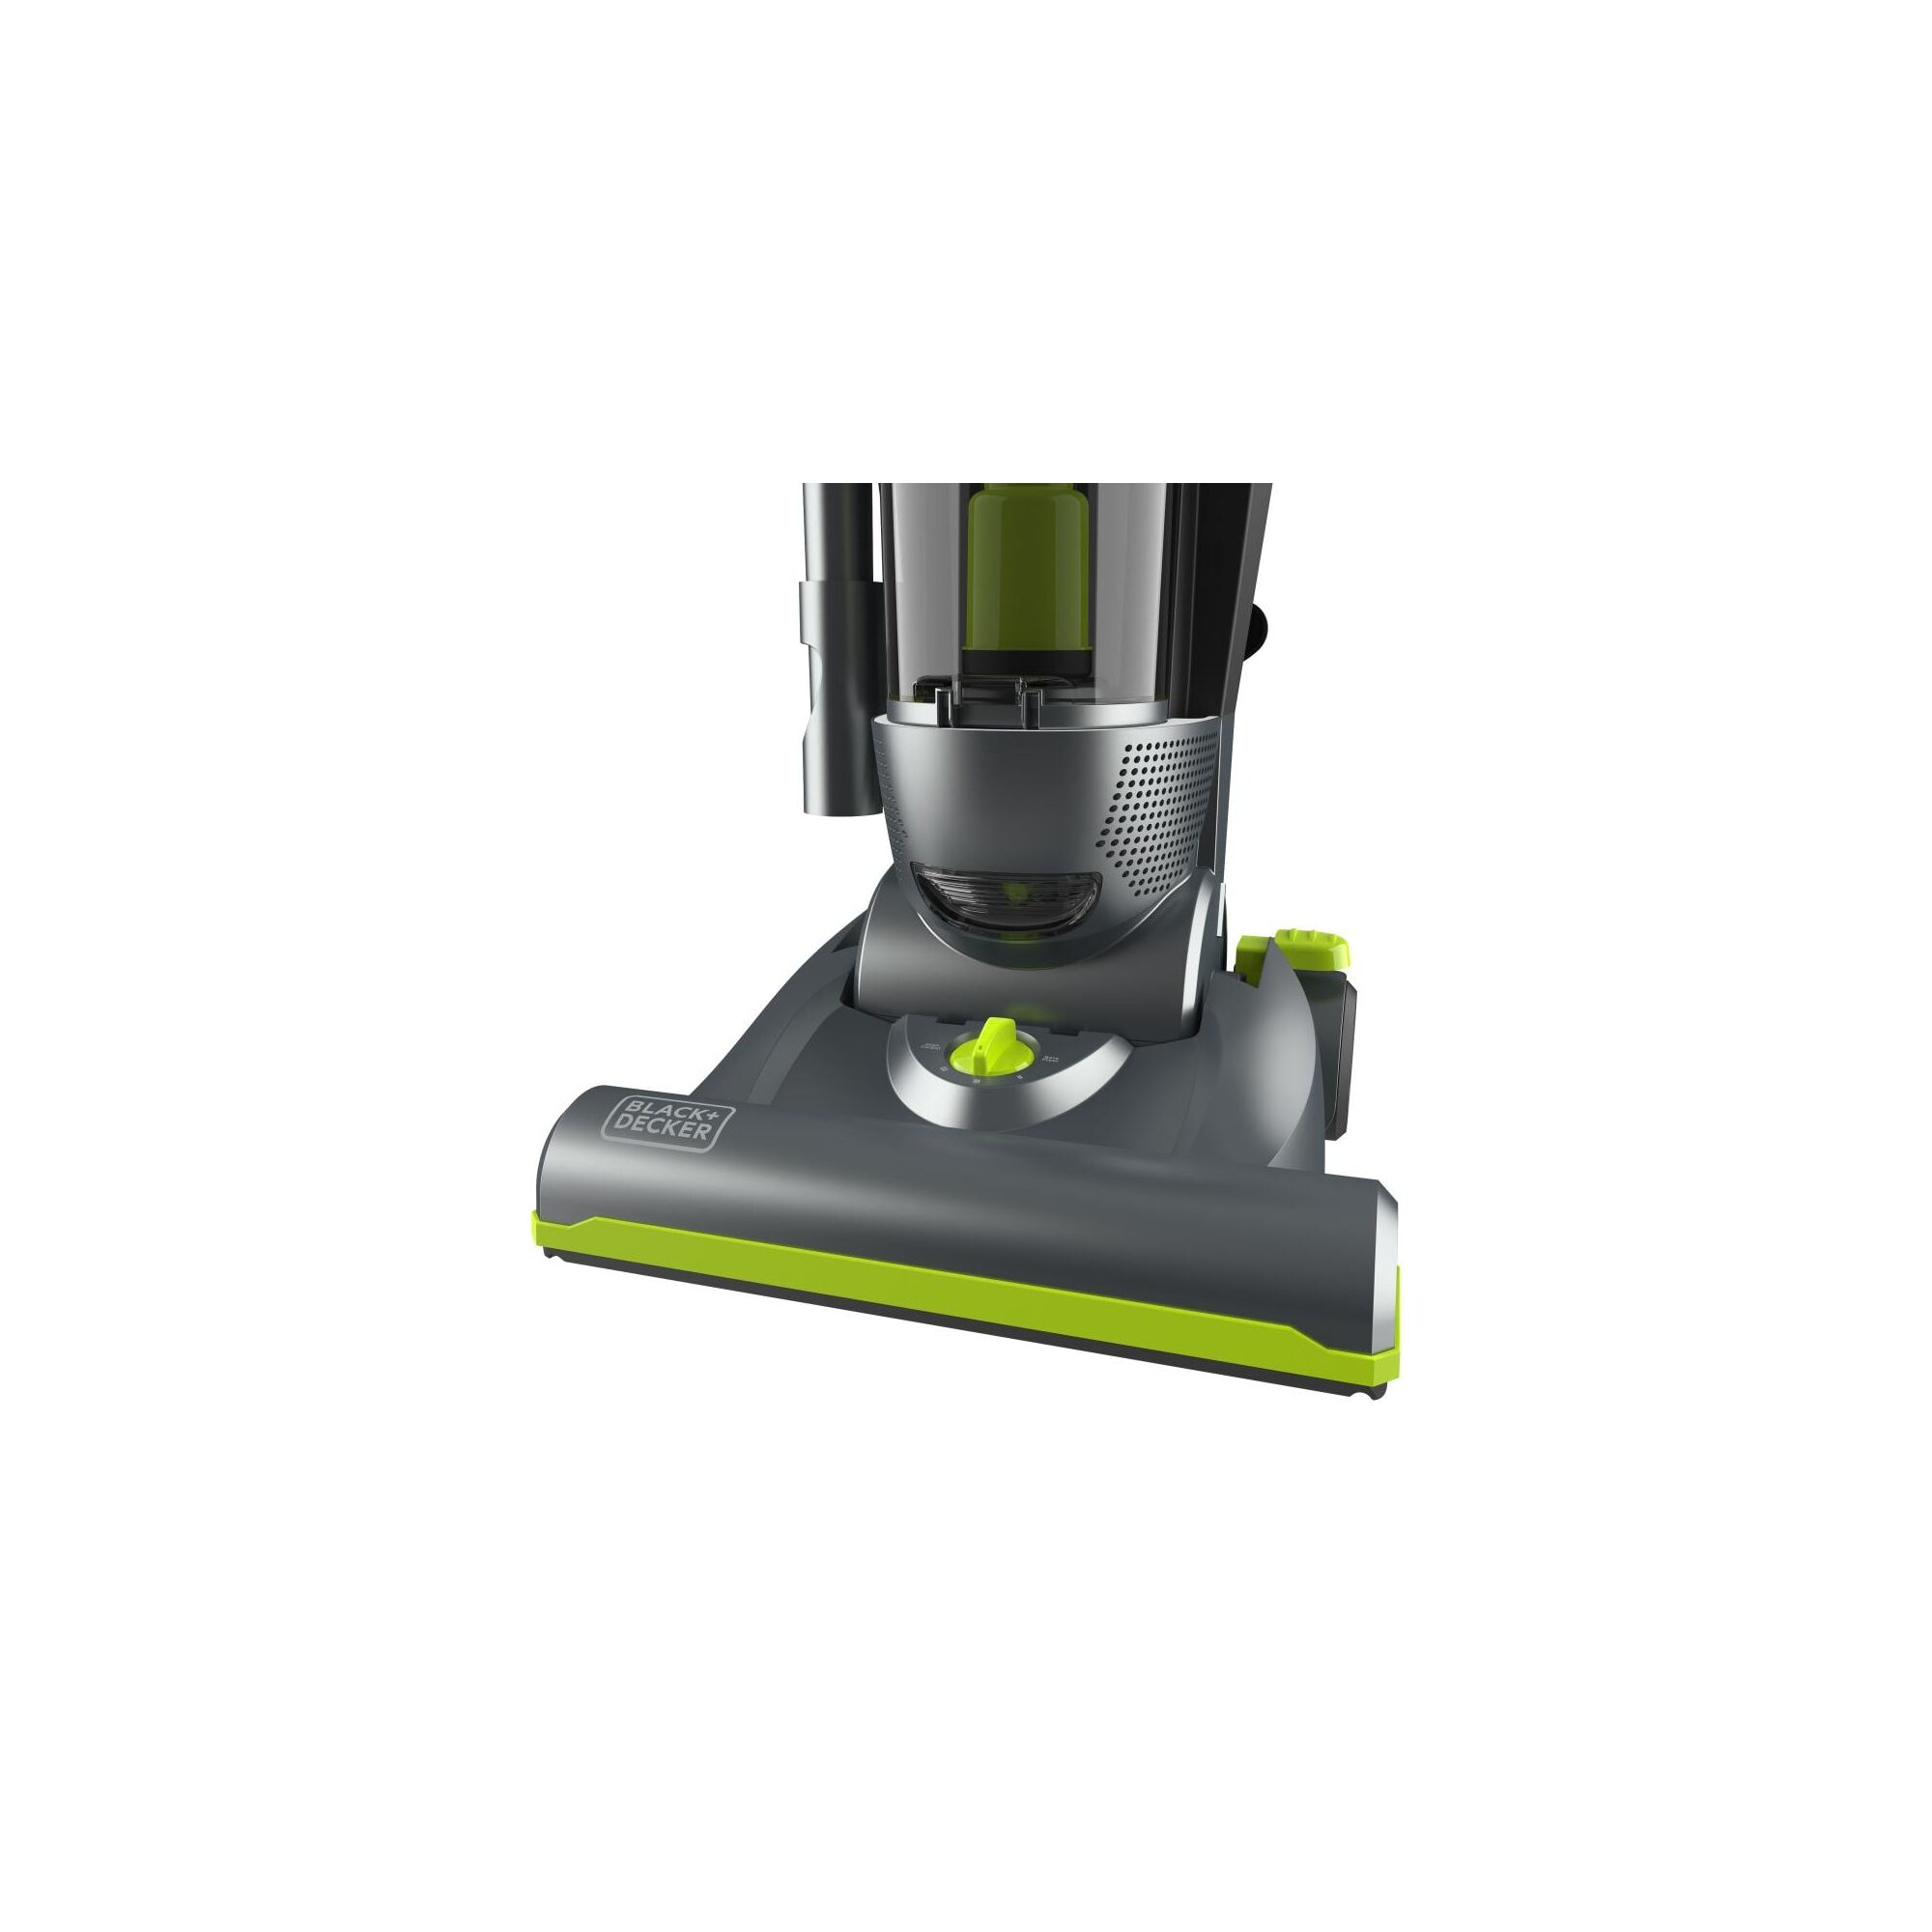 Close-up of the BLACK+DECKER upright vacuum cleaning base